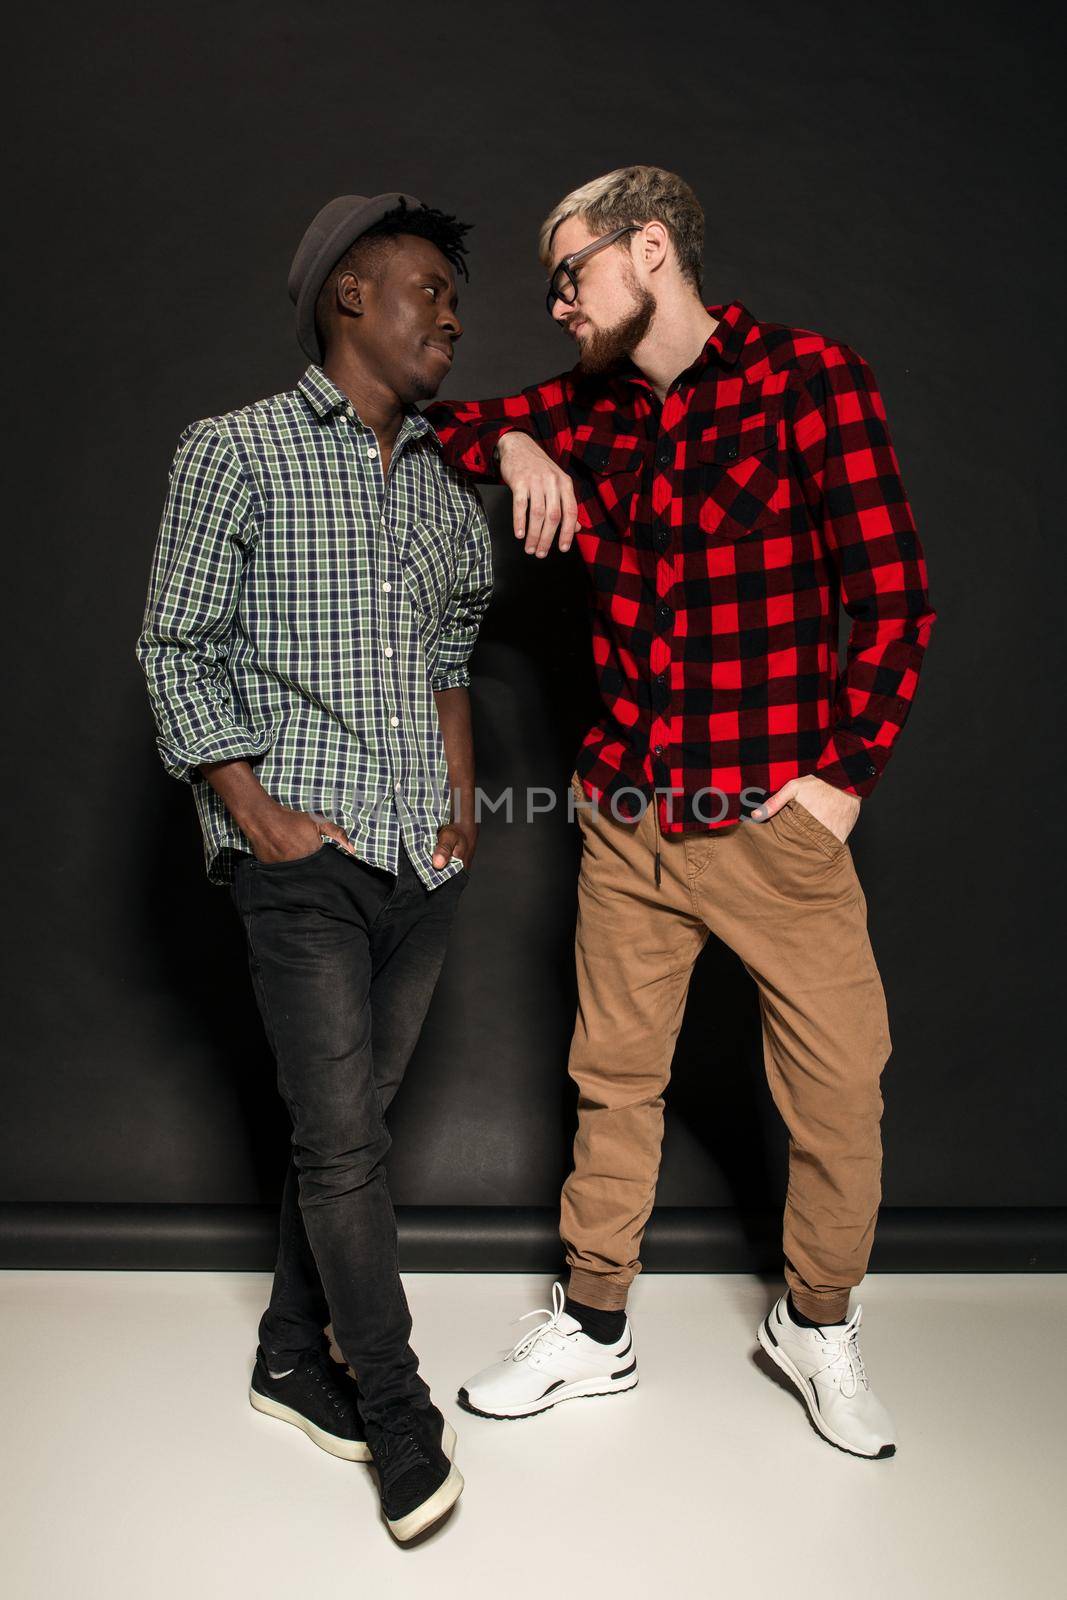 Studio lifestyle portrait of two best friends hipster boys going crazy and having great time together. On black background. Full-length photo